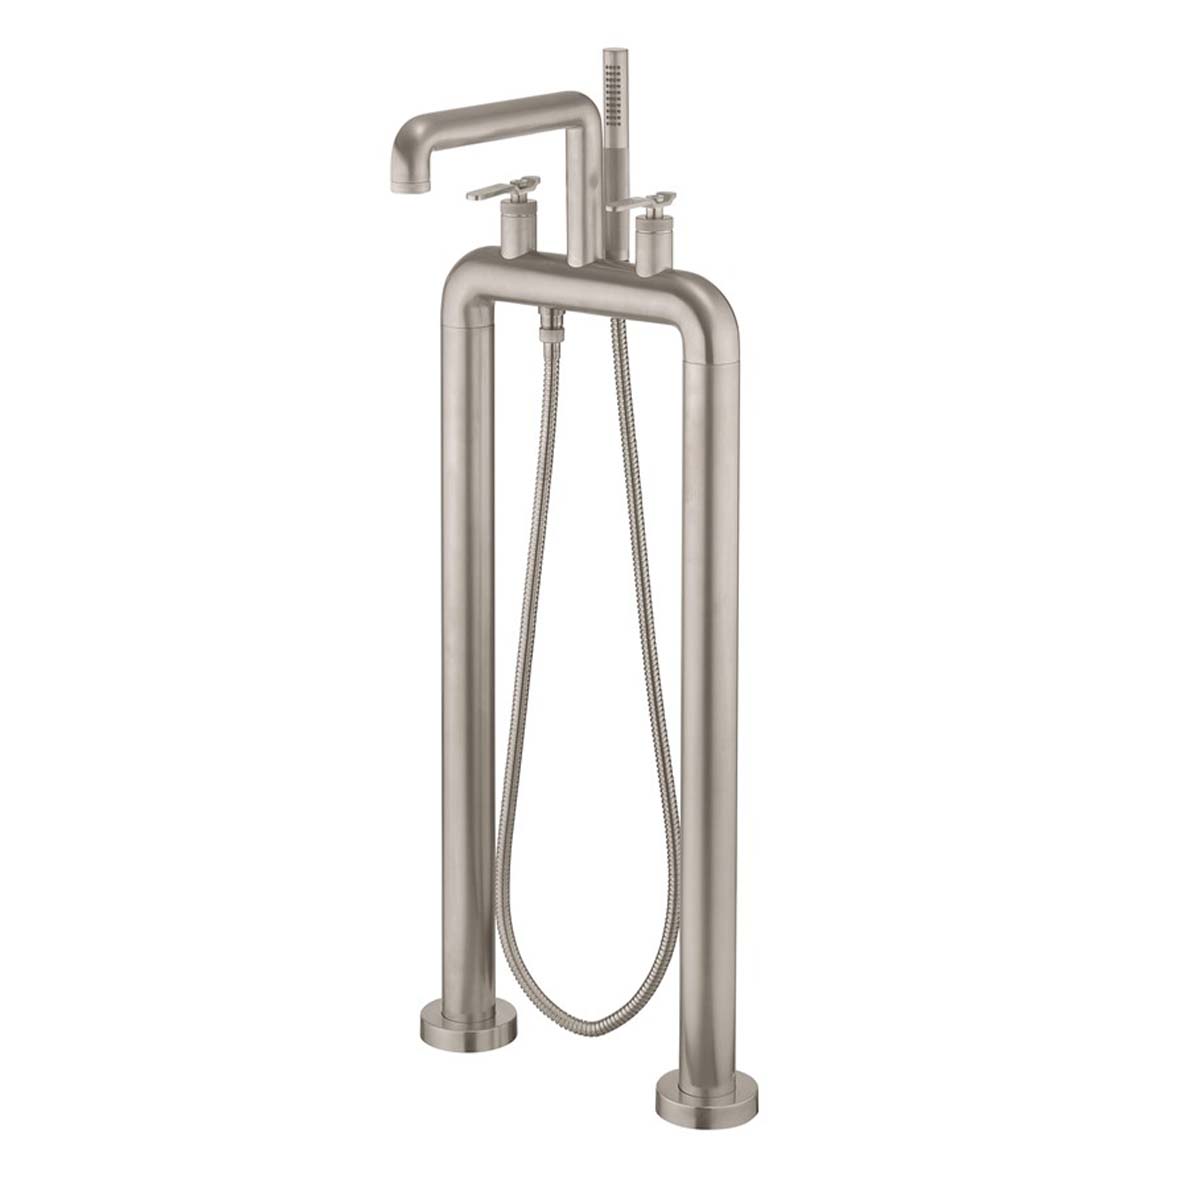 Crosswater Union Bath Shower Mixer With Lever Handles Brushed Nickel